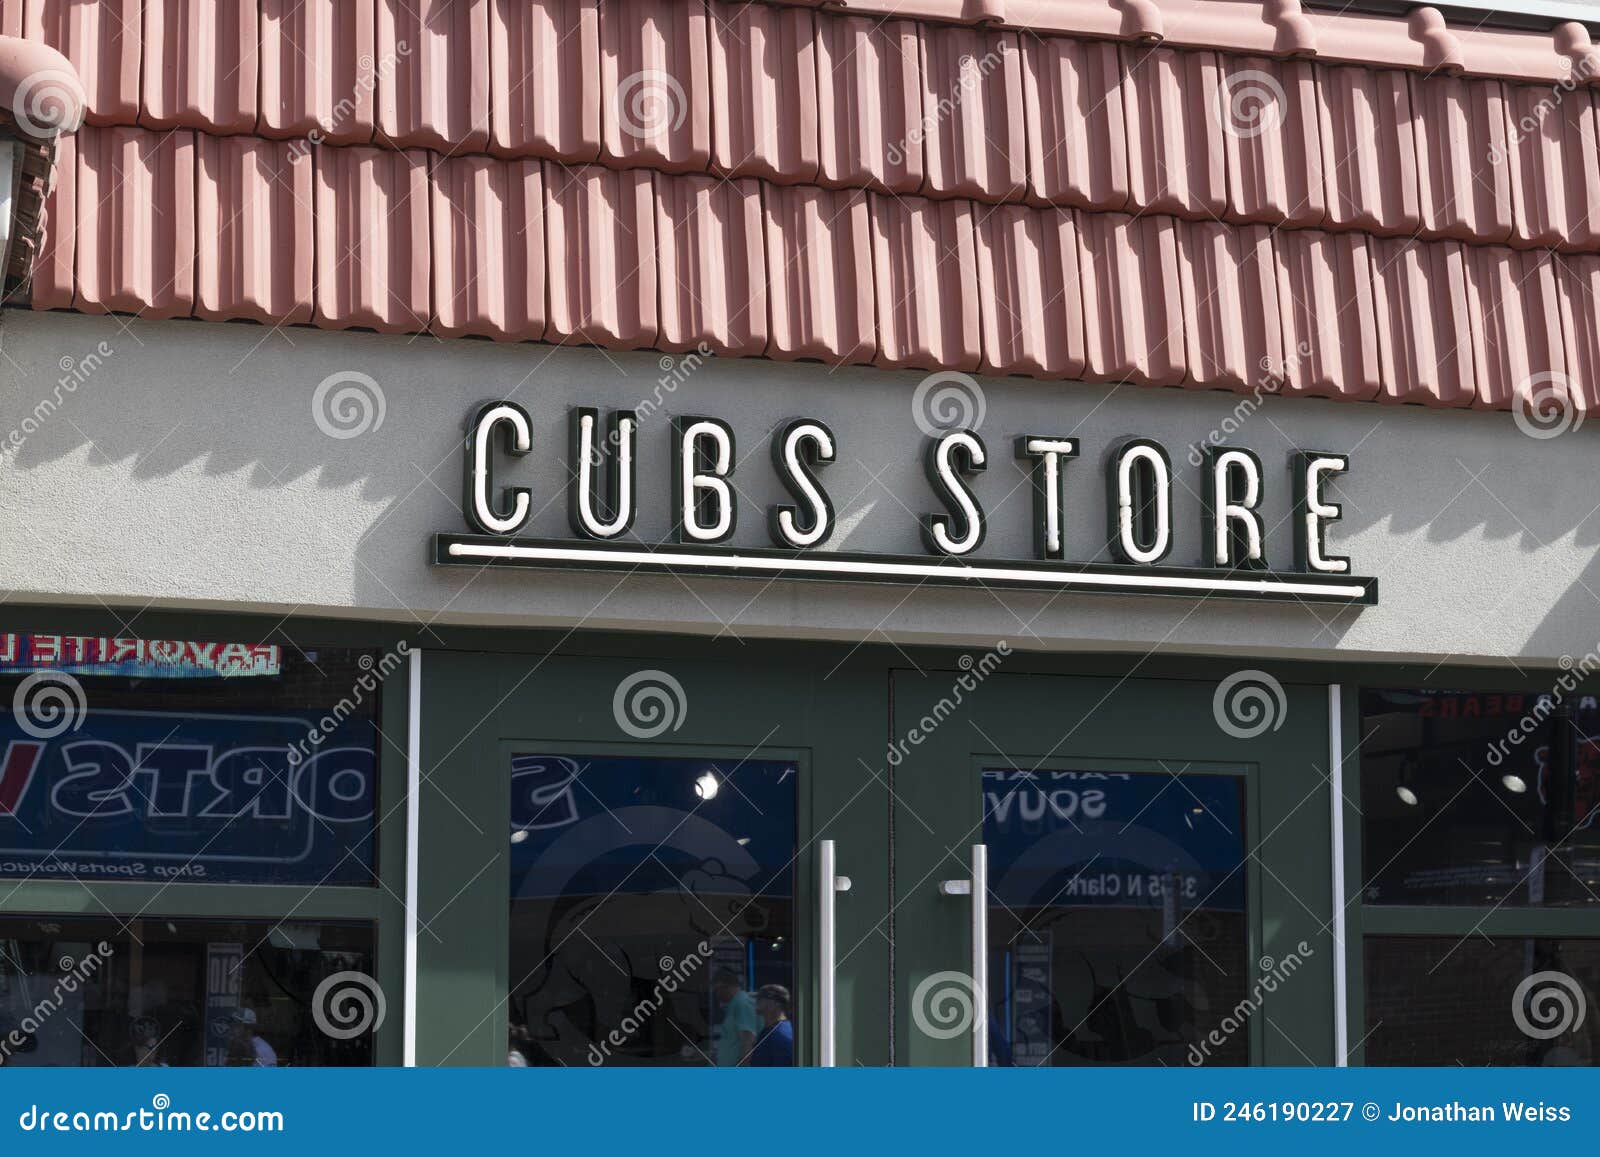 Chicago Cubs Store at Wrigley Field. Wrigley Field Has Been Home